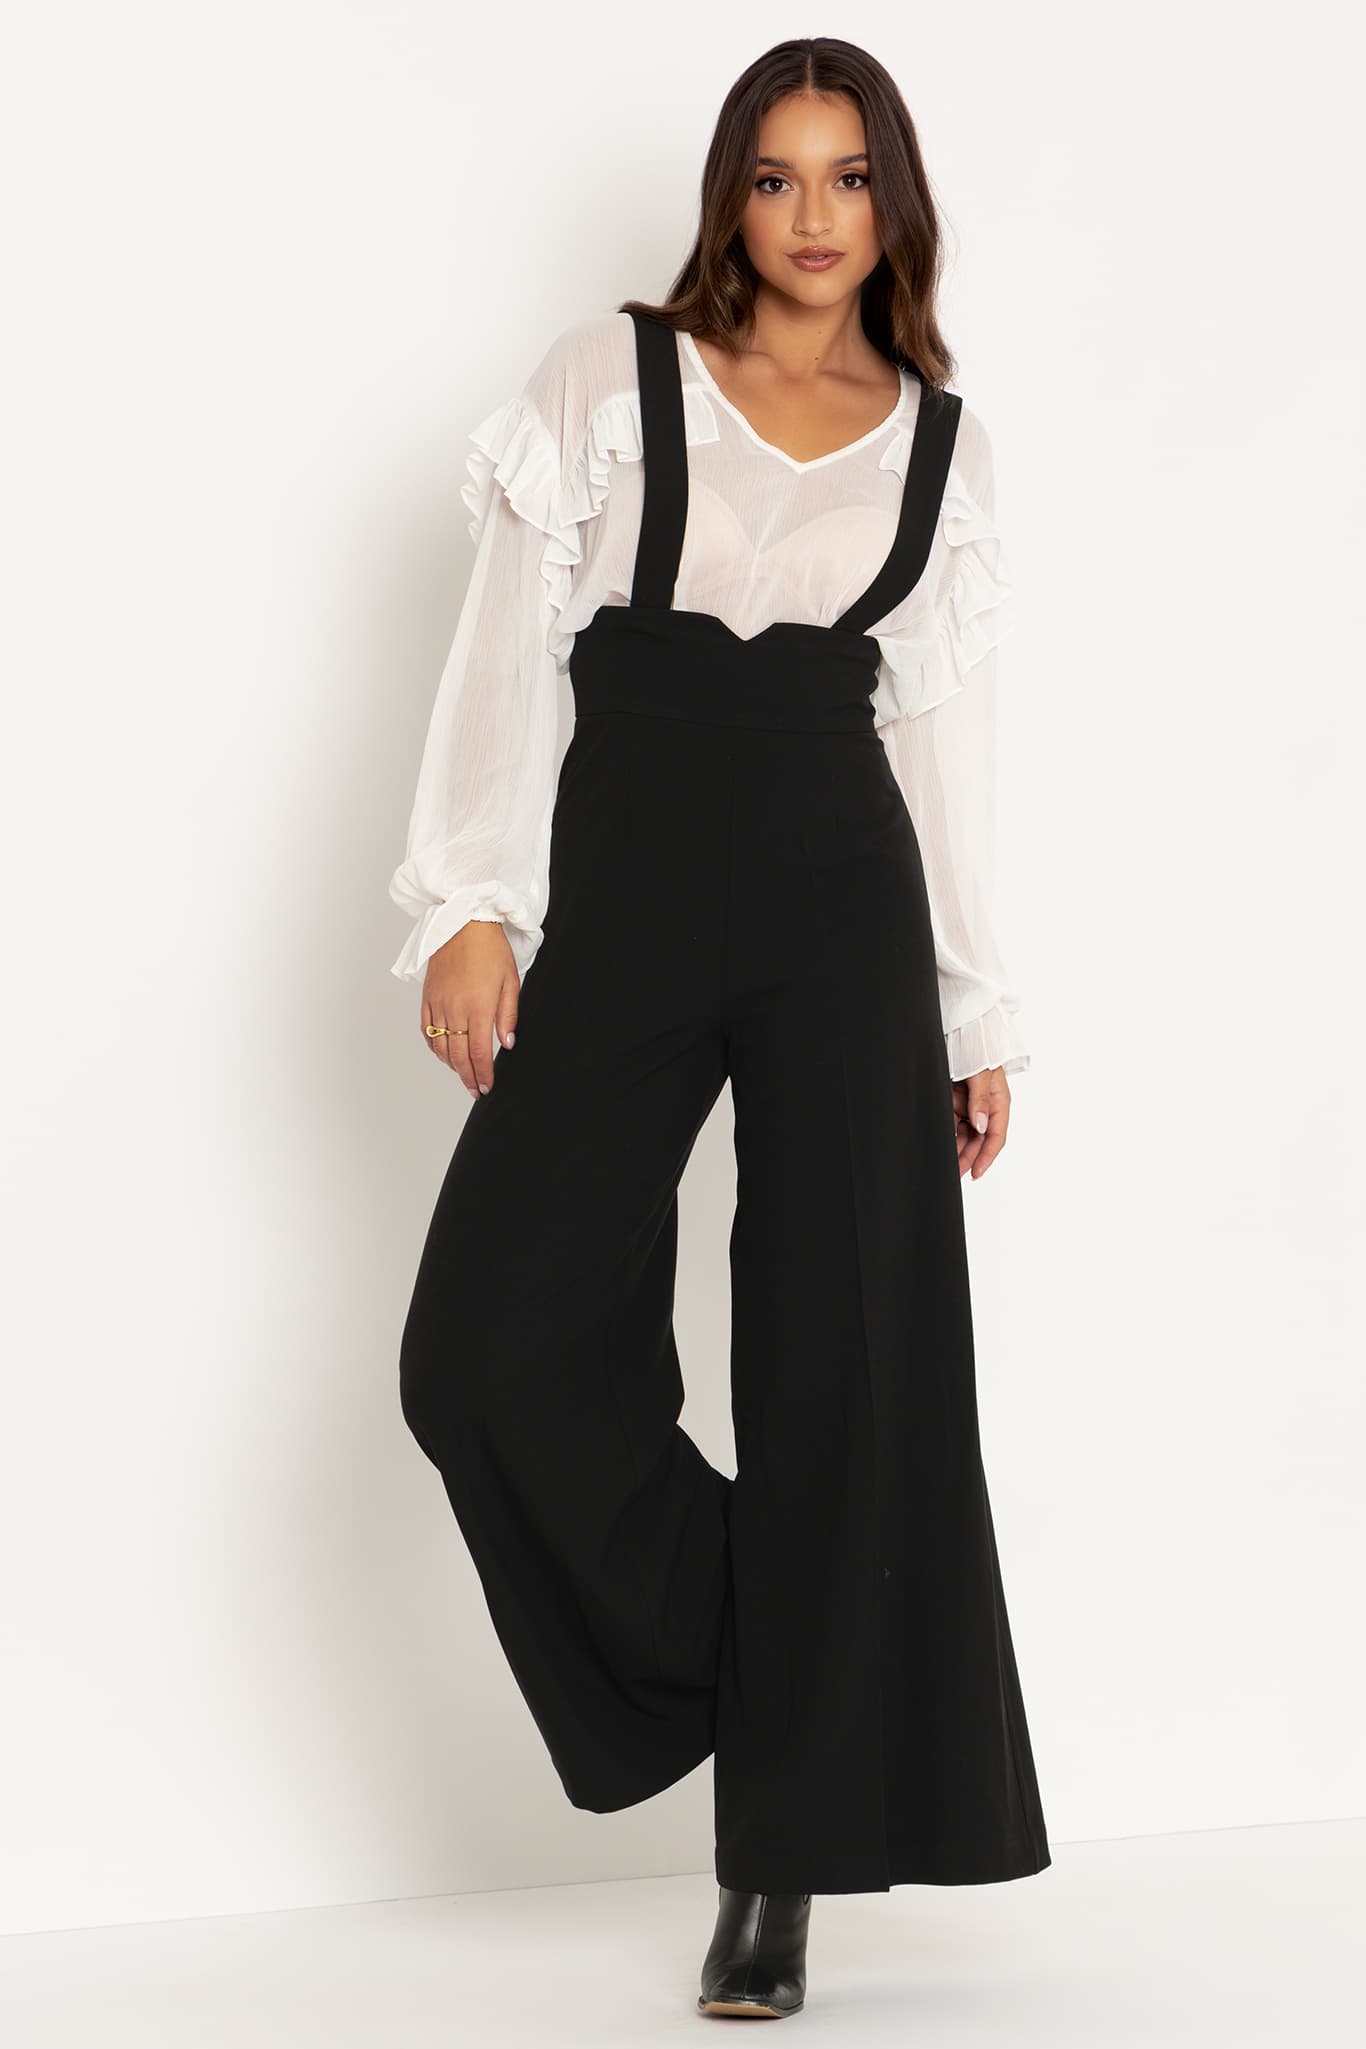 Oh High There Suspender Pants Limited